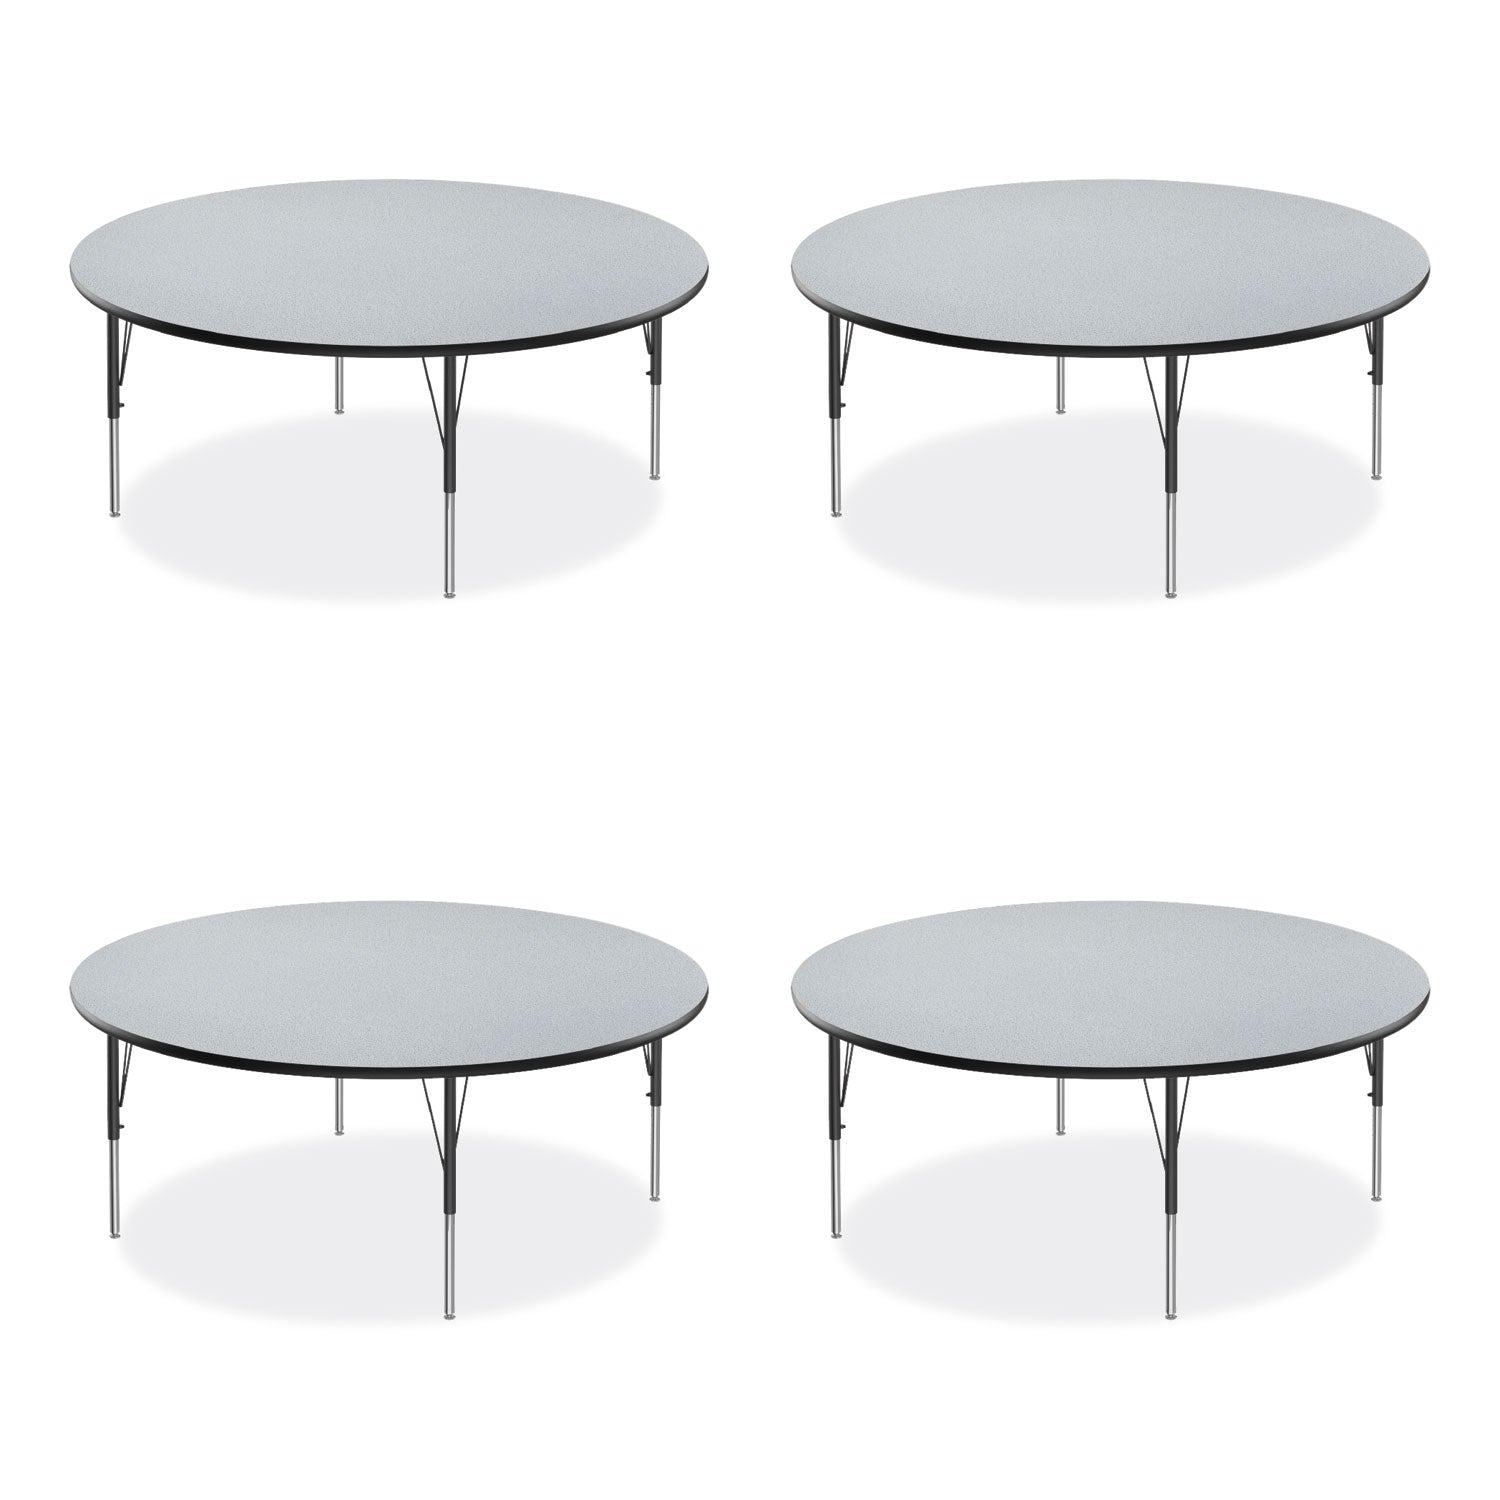 height-adjustable-activity-table-round-60-x-19-to-29-gray-granite-top-black-legs-4-pallet-ships-in-4-6-business-days_crl60tfrd1595k4 - 1